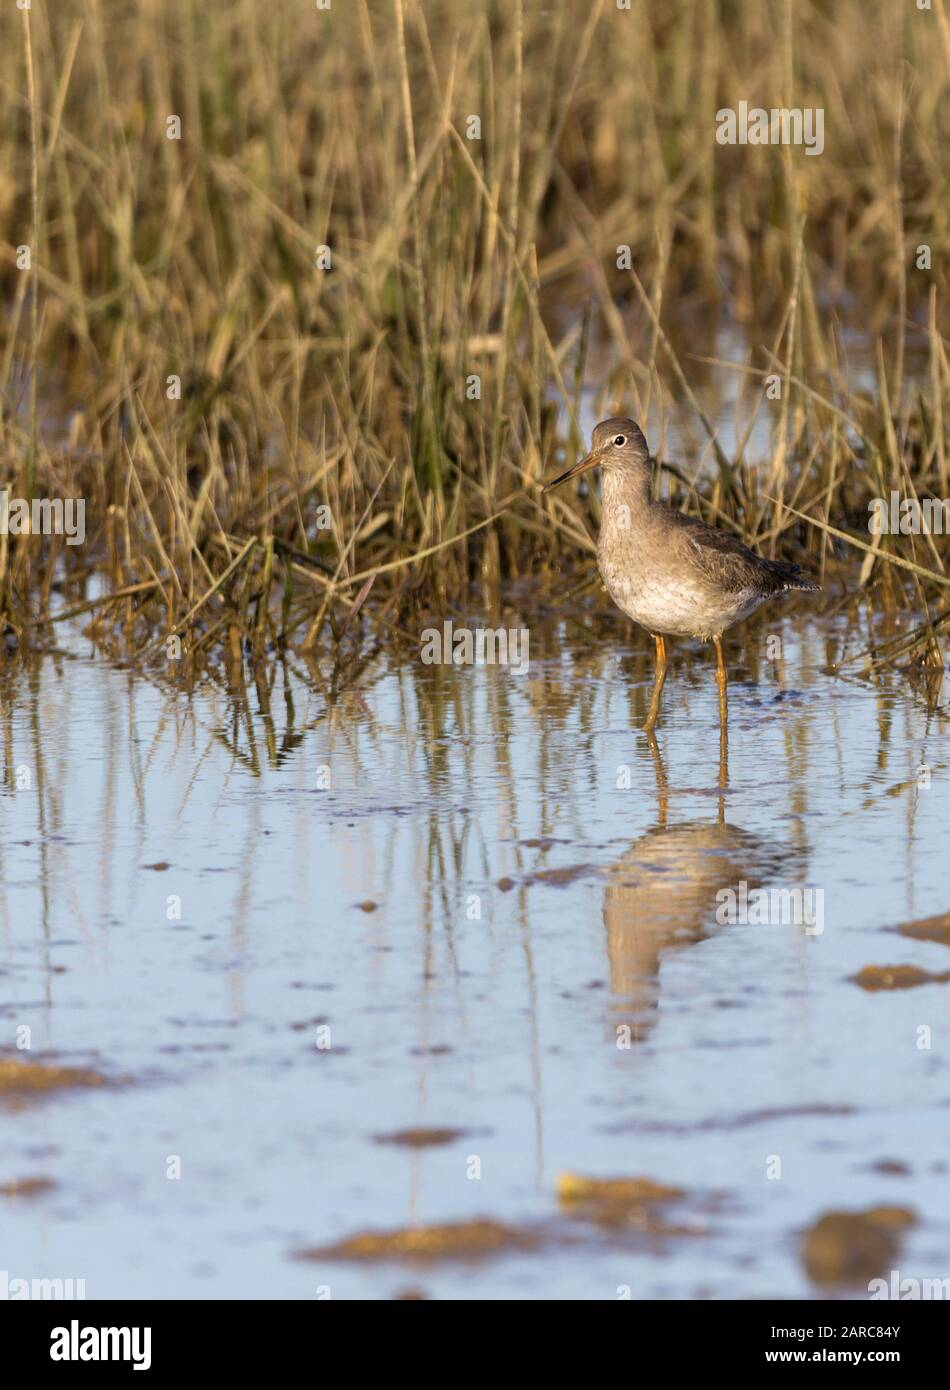 Redshank Tringa totanus wader with long red based black bill and long red legs and feet. Grey brown plumage above pale below with streaks and barring Stock Photo